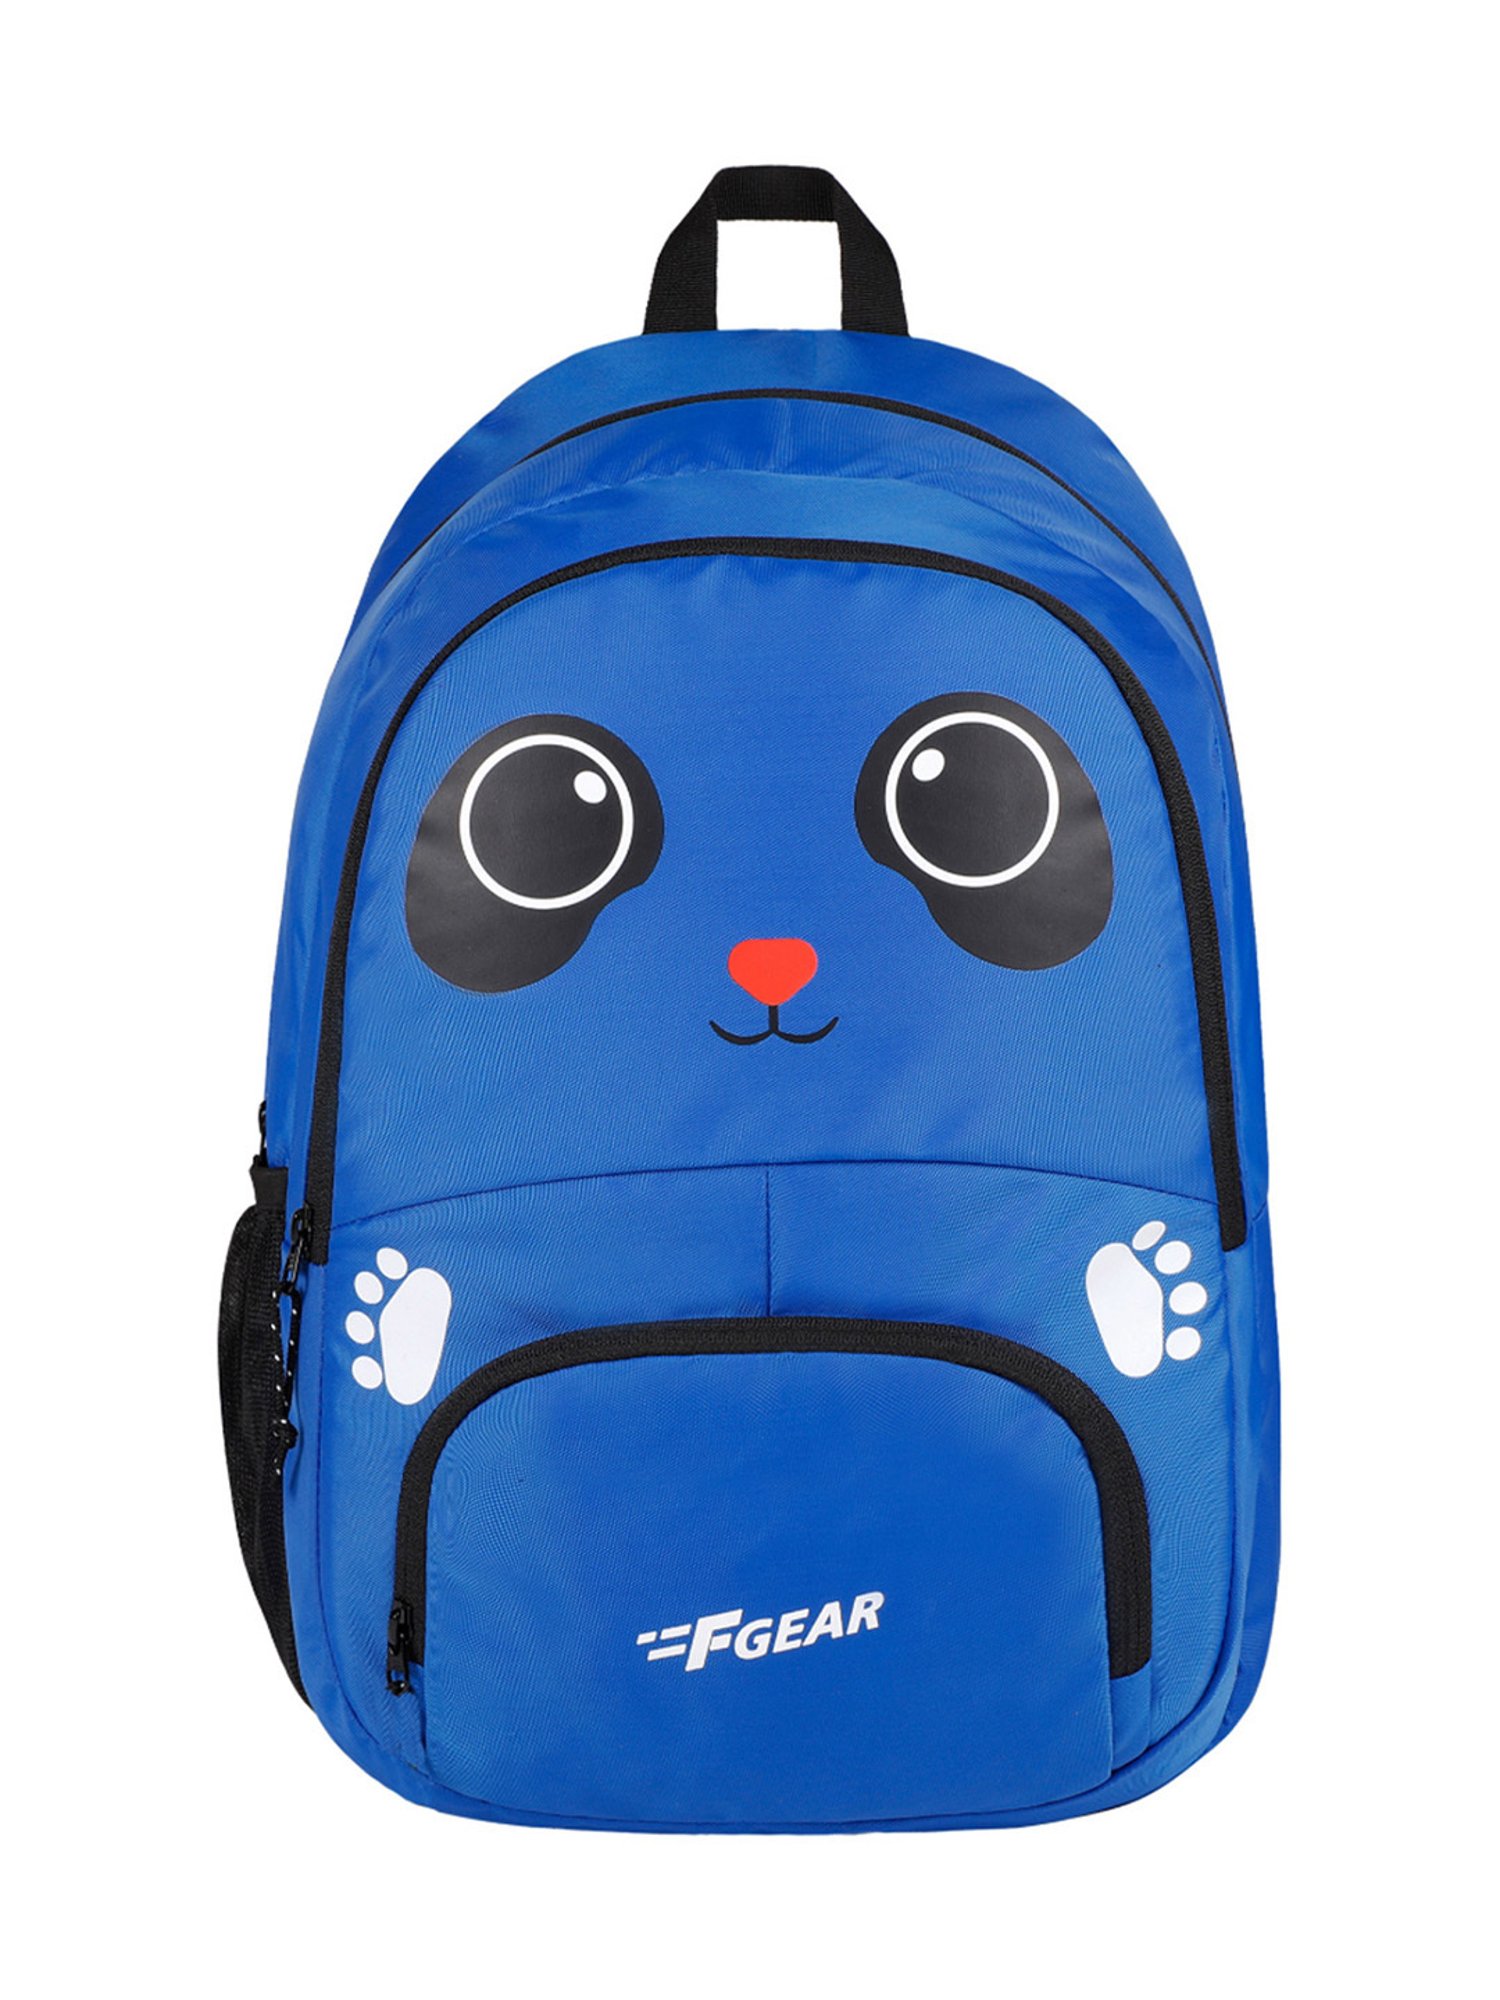 Buy F Gear Paw Royal Blue Small Backpack at Best Price @ Tata CLiQ